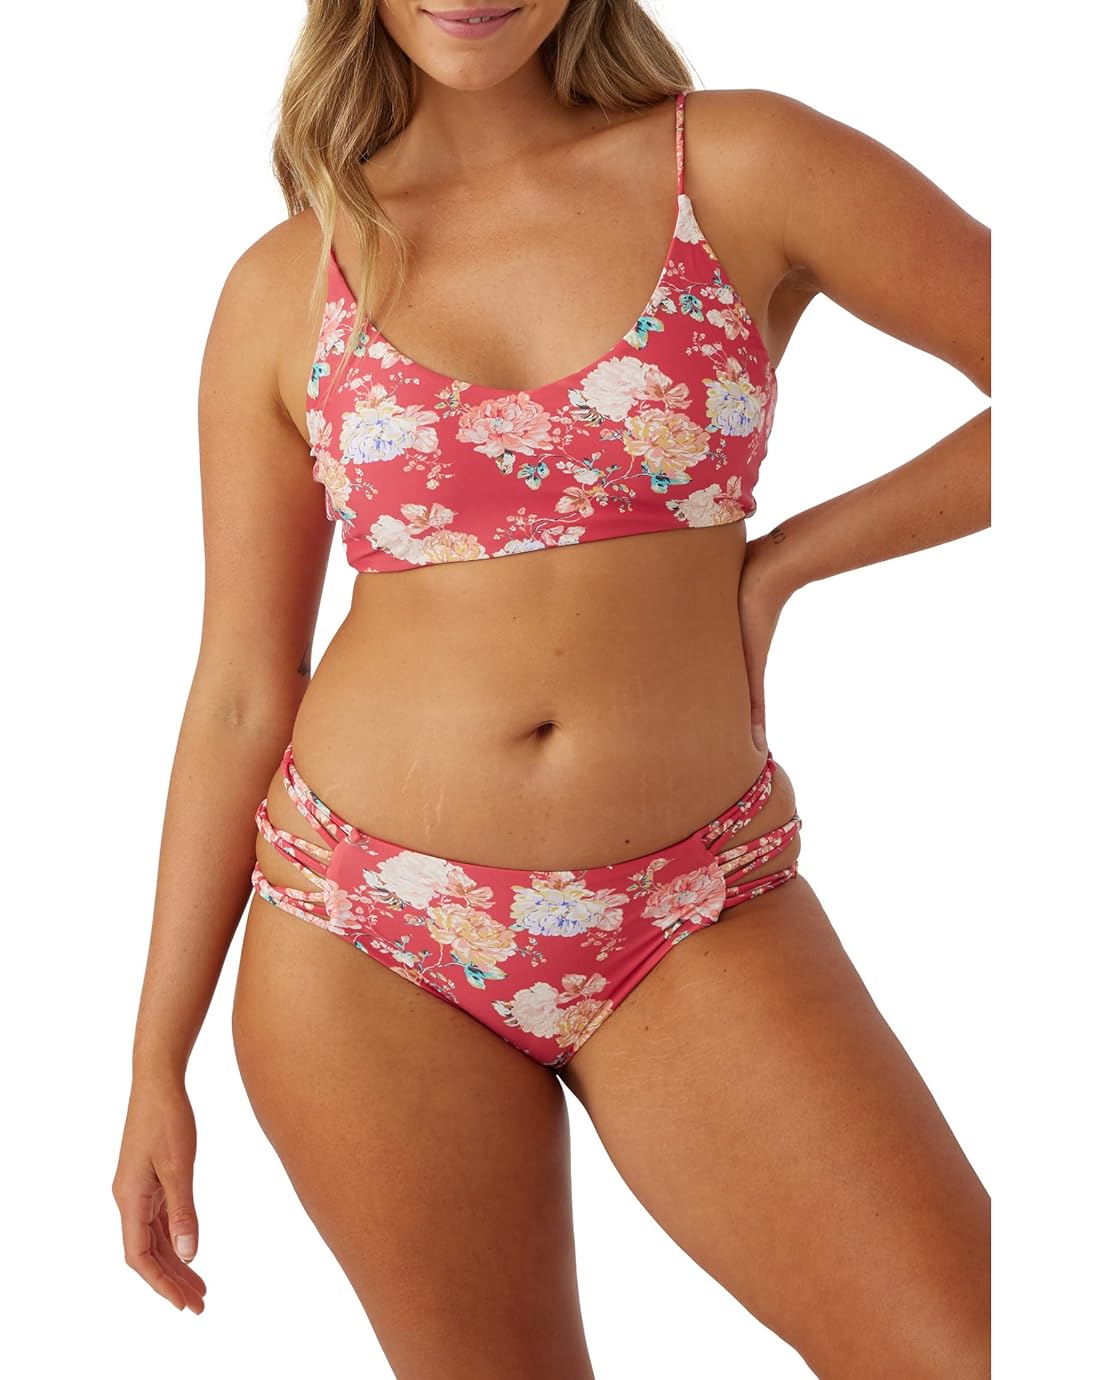 ONeill Stella Floral Middles Top